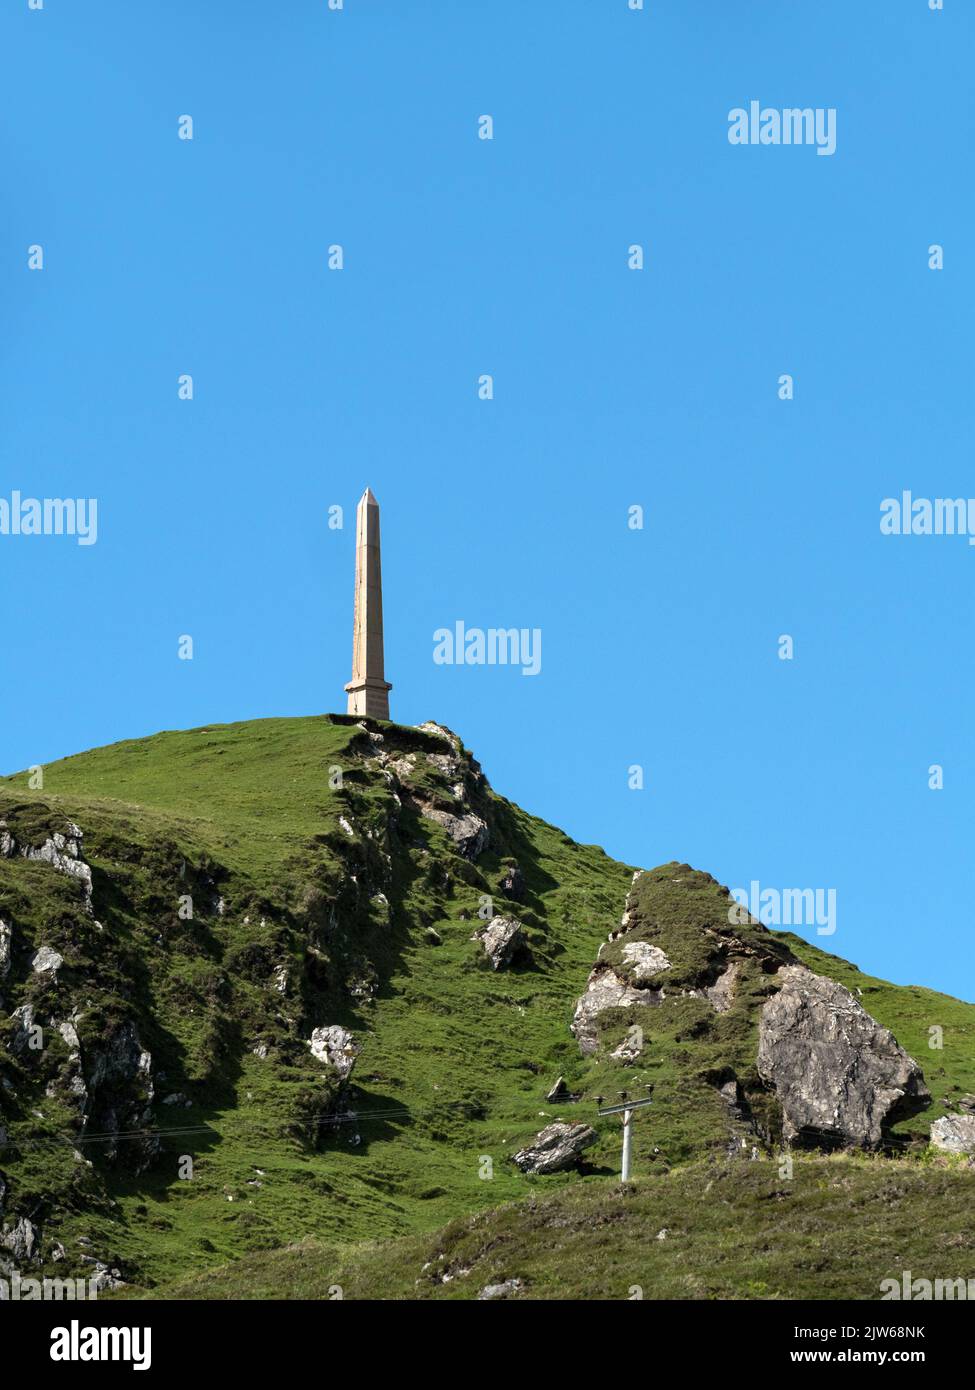 The Lord Colonsay Duncan MacNeill Monument obelisk stands in a prominent hilltop location on the remote Hebridean Island of Colonsay, Scotland, UK Stock Photo